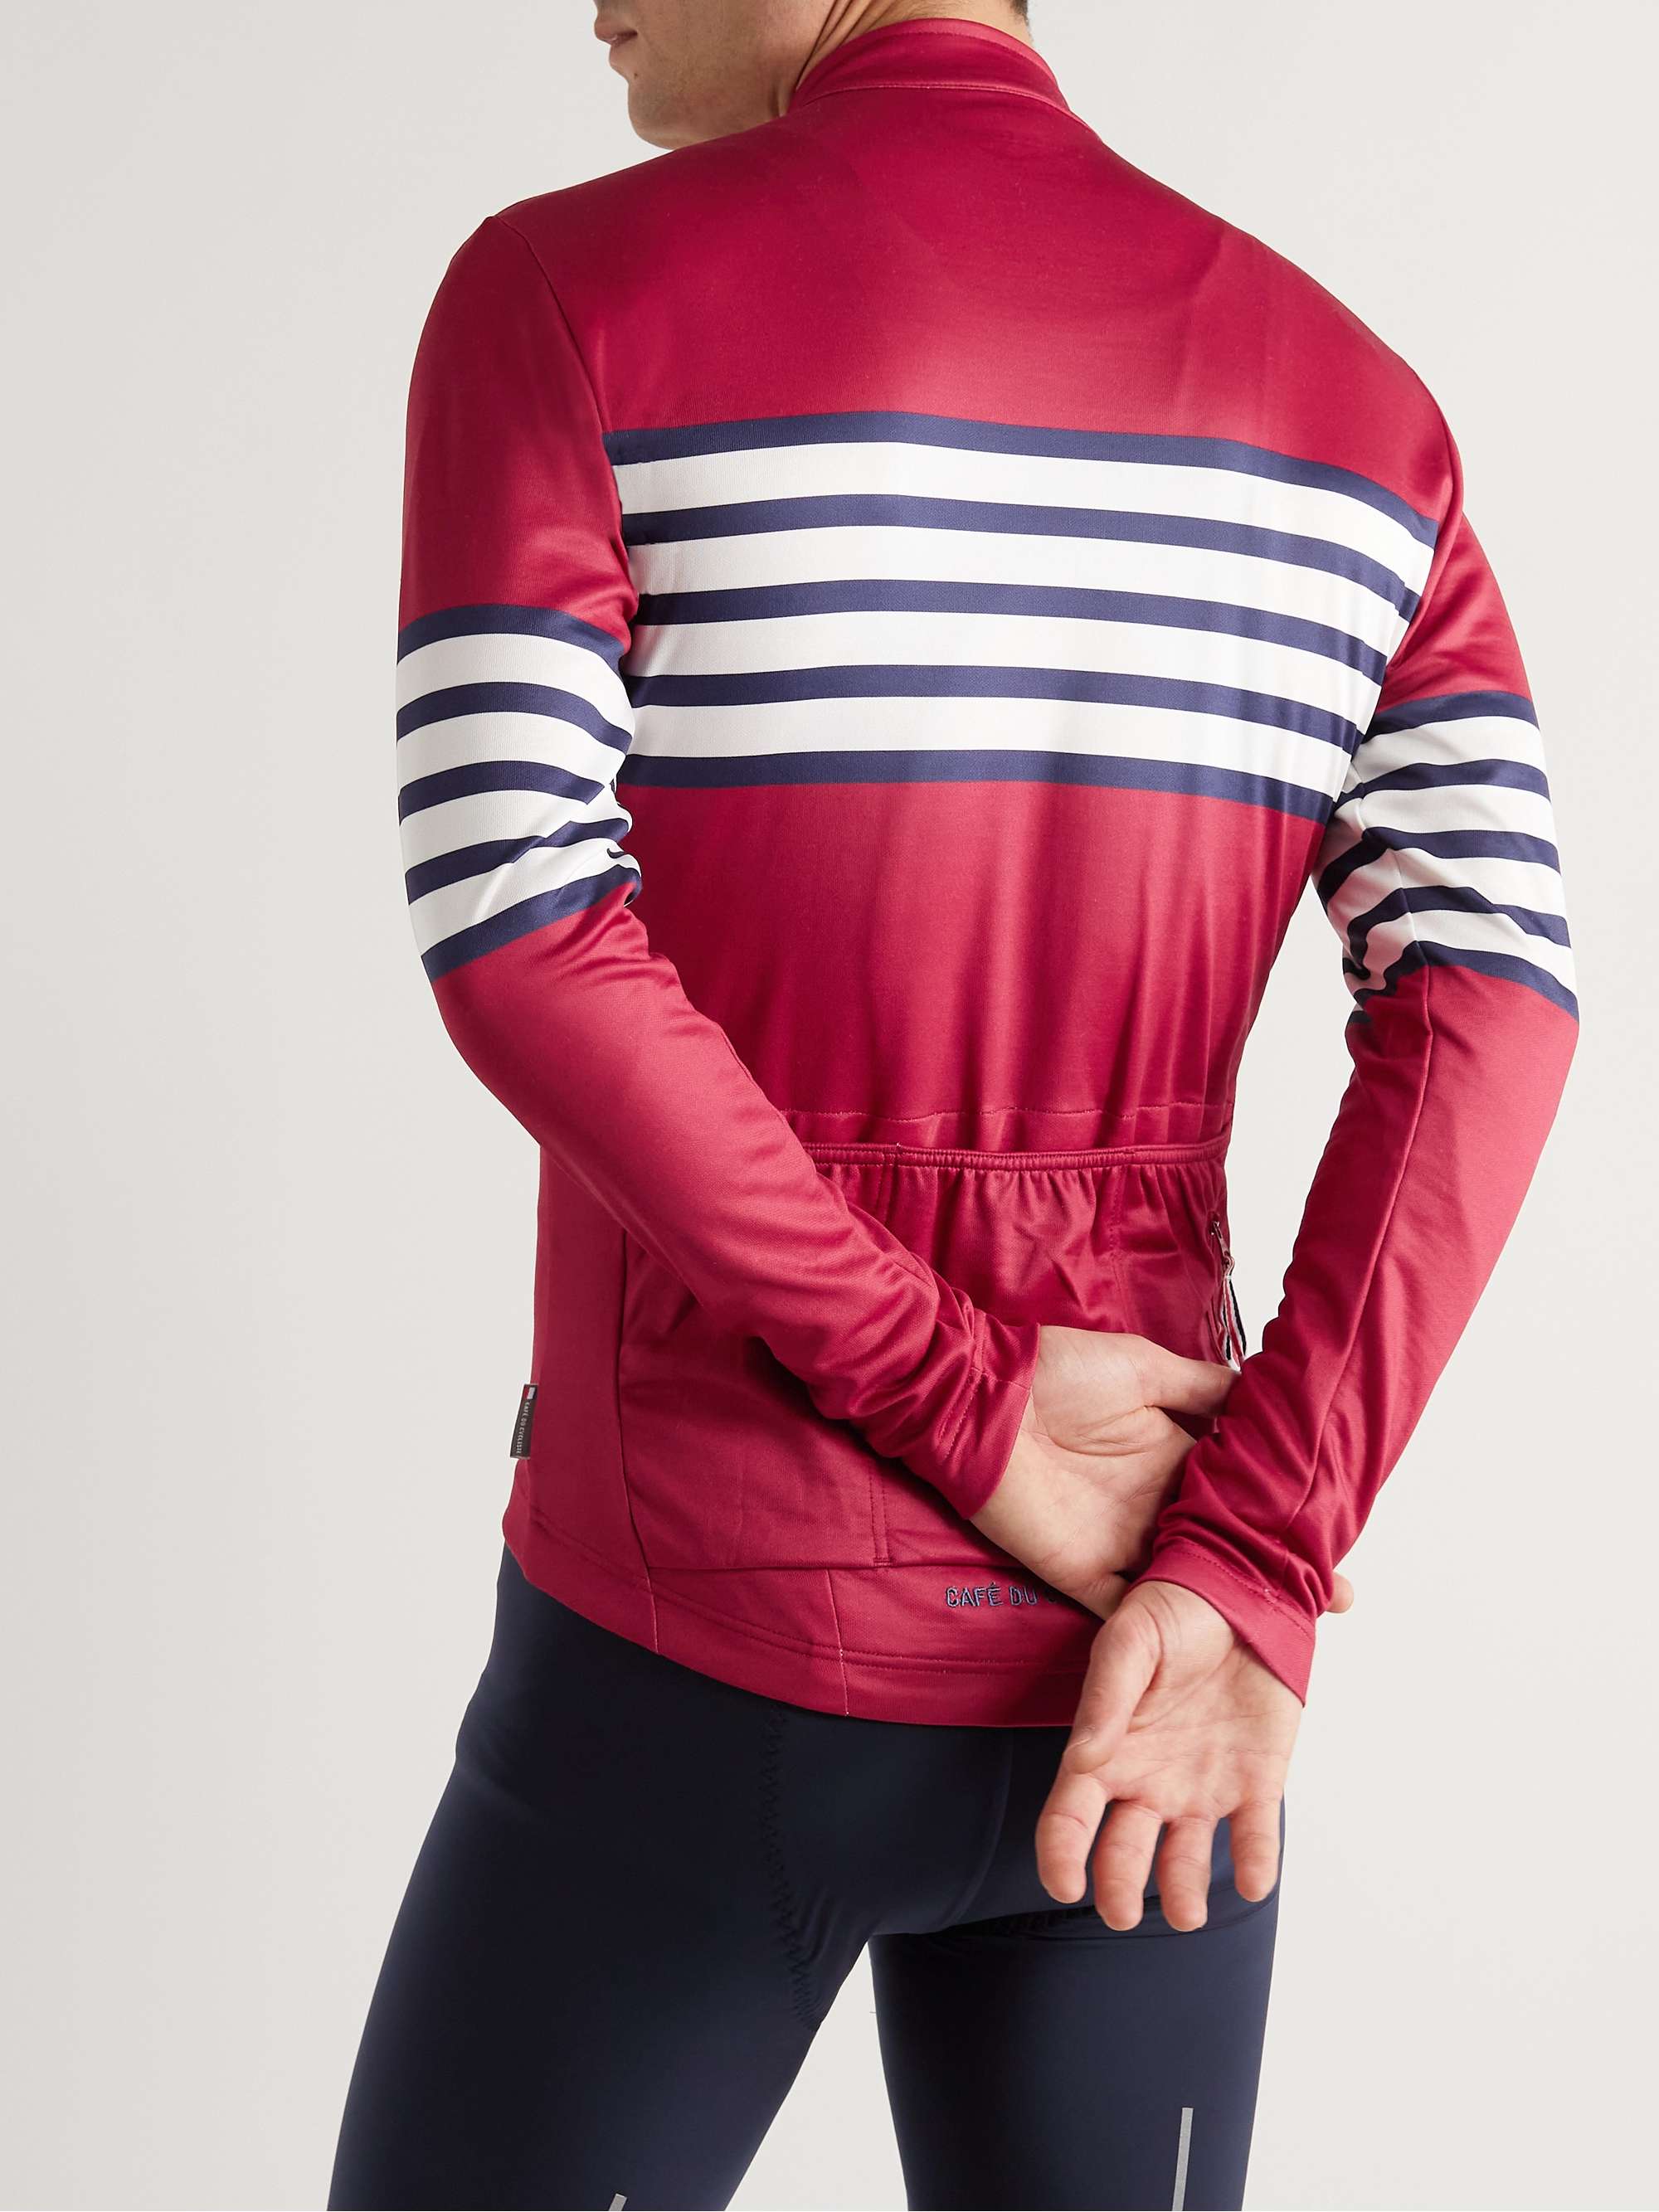 CAFE DU CYCLISTE Claudette Striped Recycled Cycling Jersey